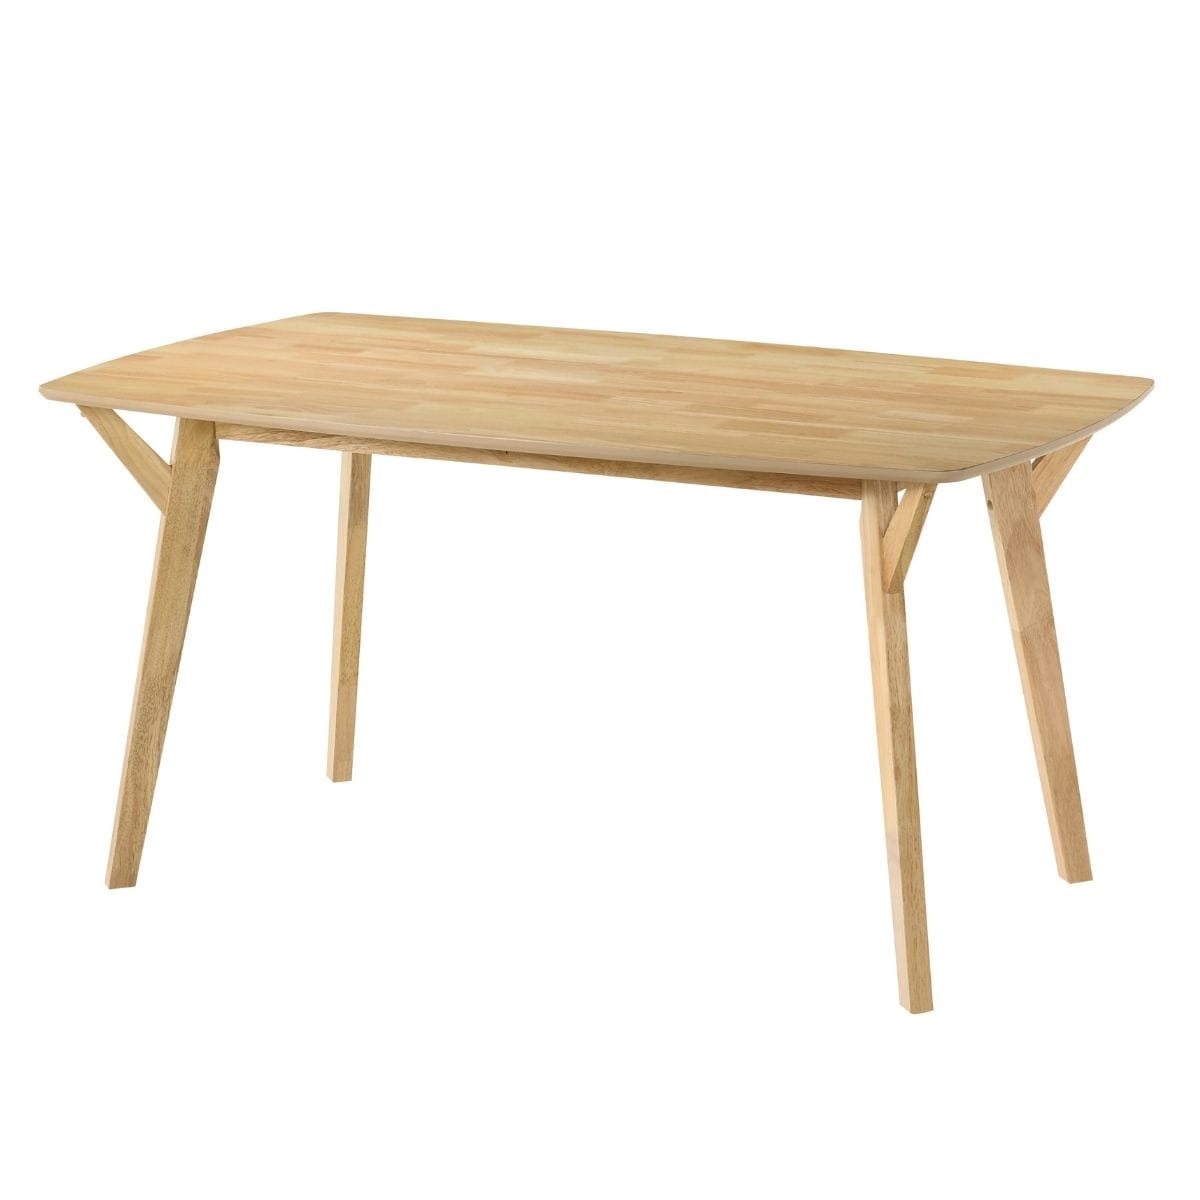 Oval dining table 6 seater 1.5m Natural - Newstart Furniture